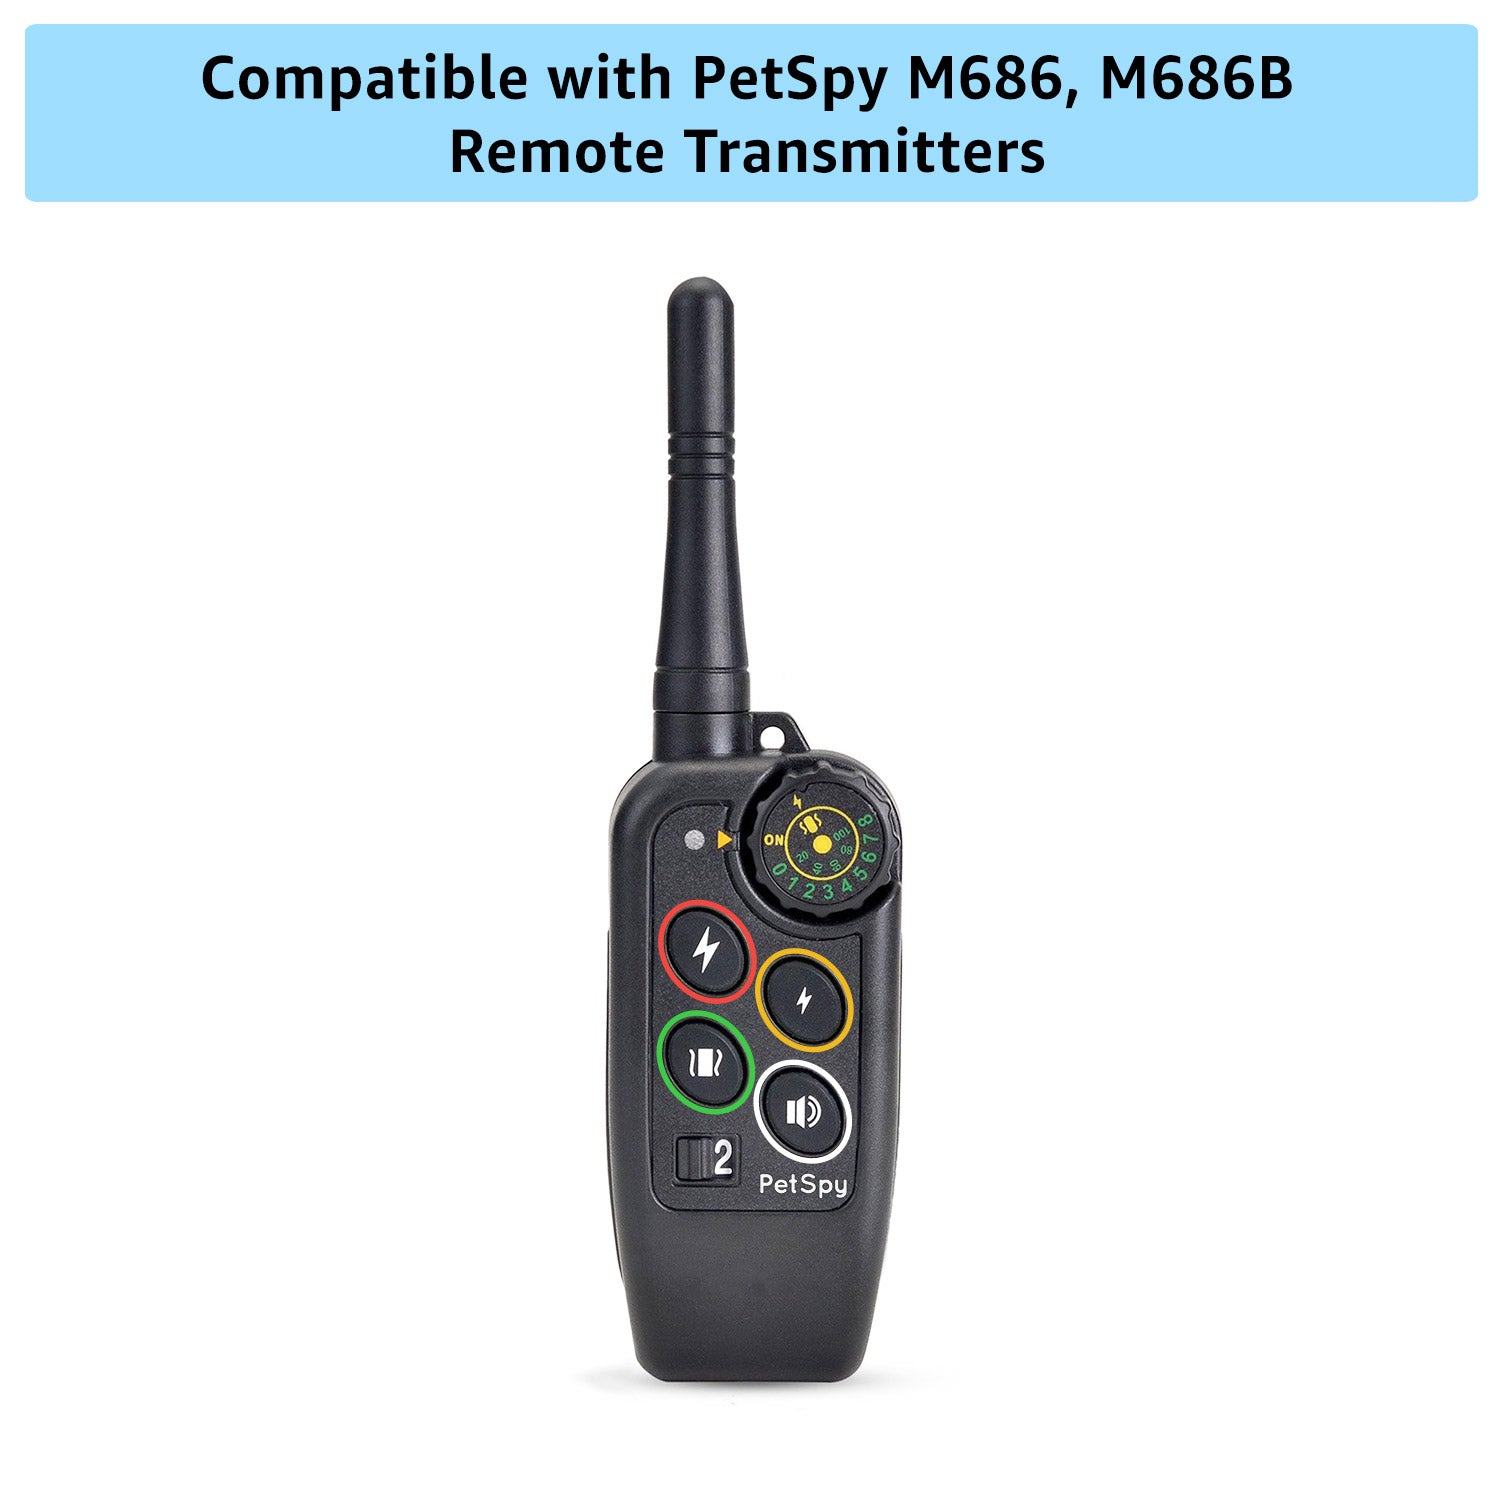 M686 Extra Antenna compatible with petspy M686 M686B remote transmitters